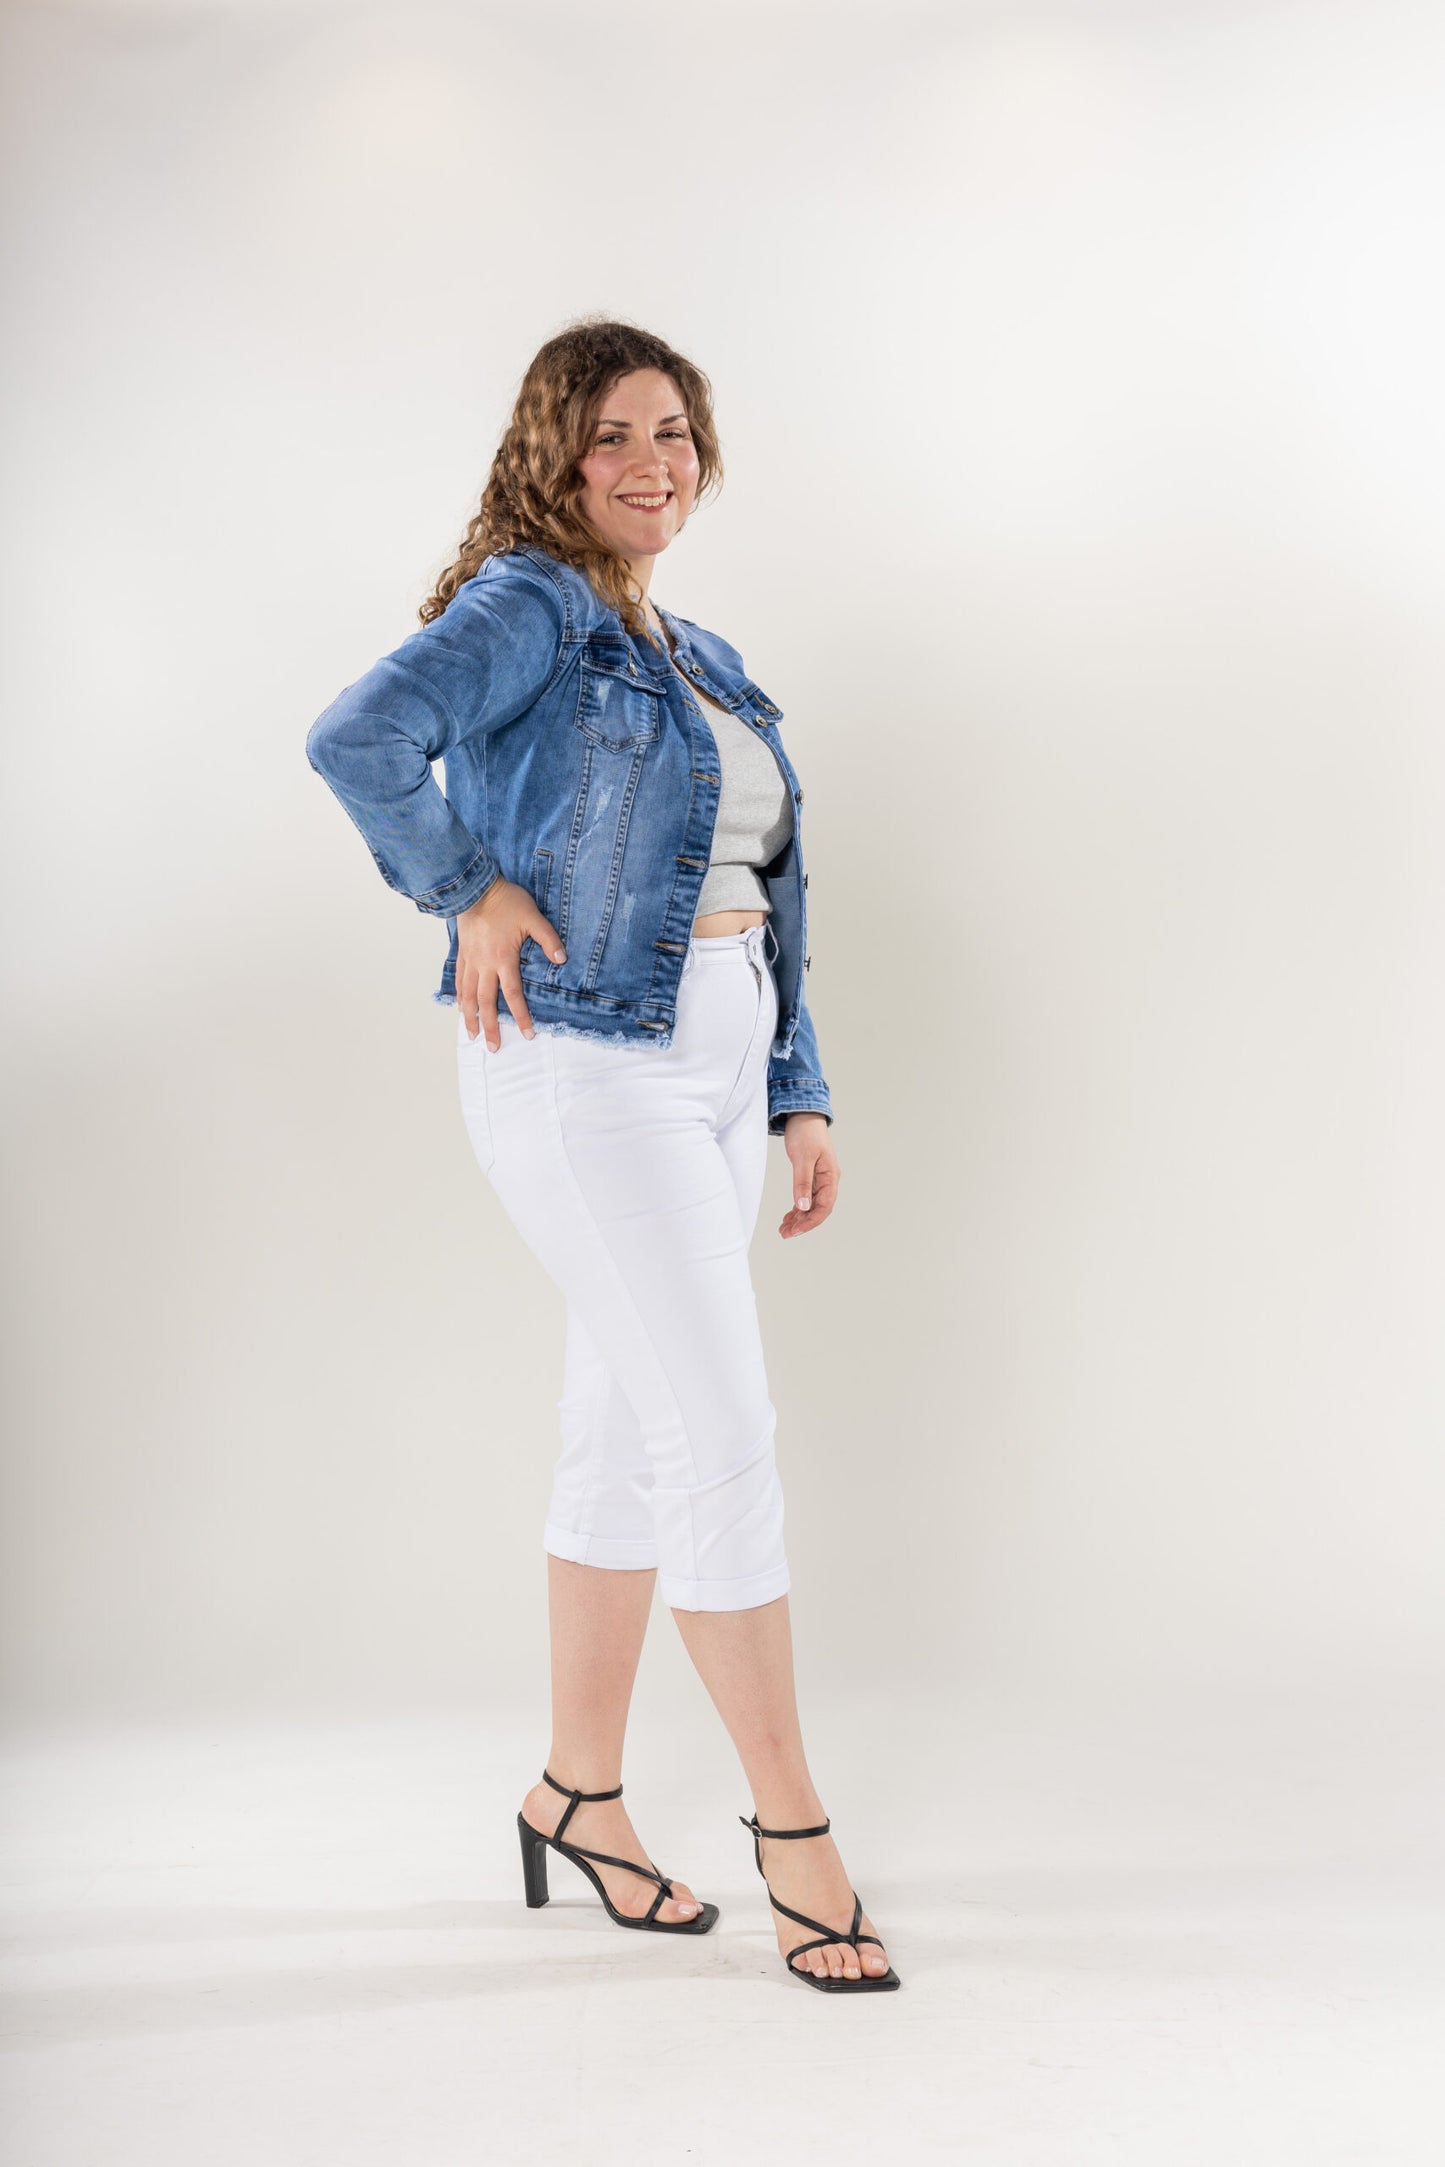 Wholesale Plus Size Blue Jeans Jacket with Fray Detail on the Collar